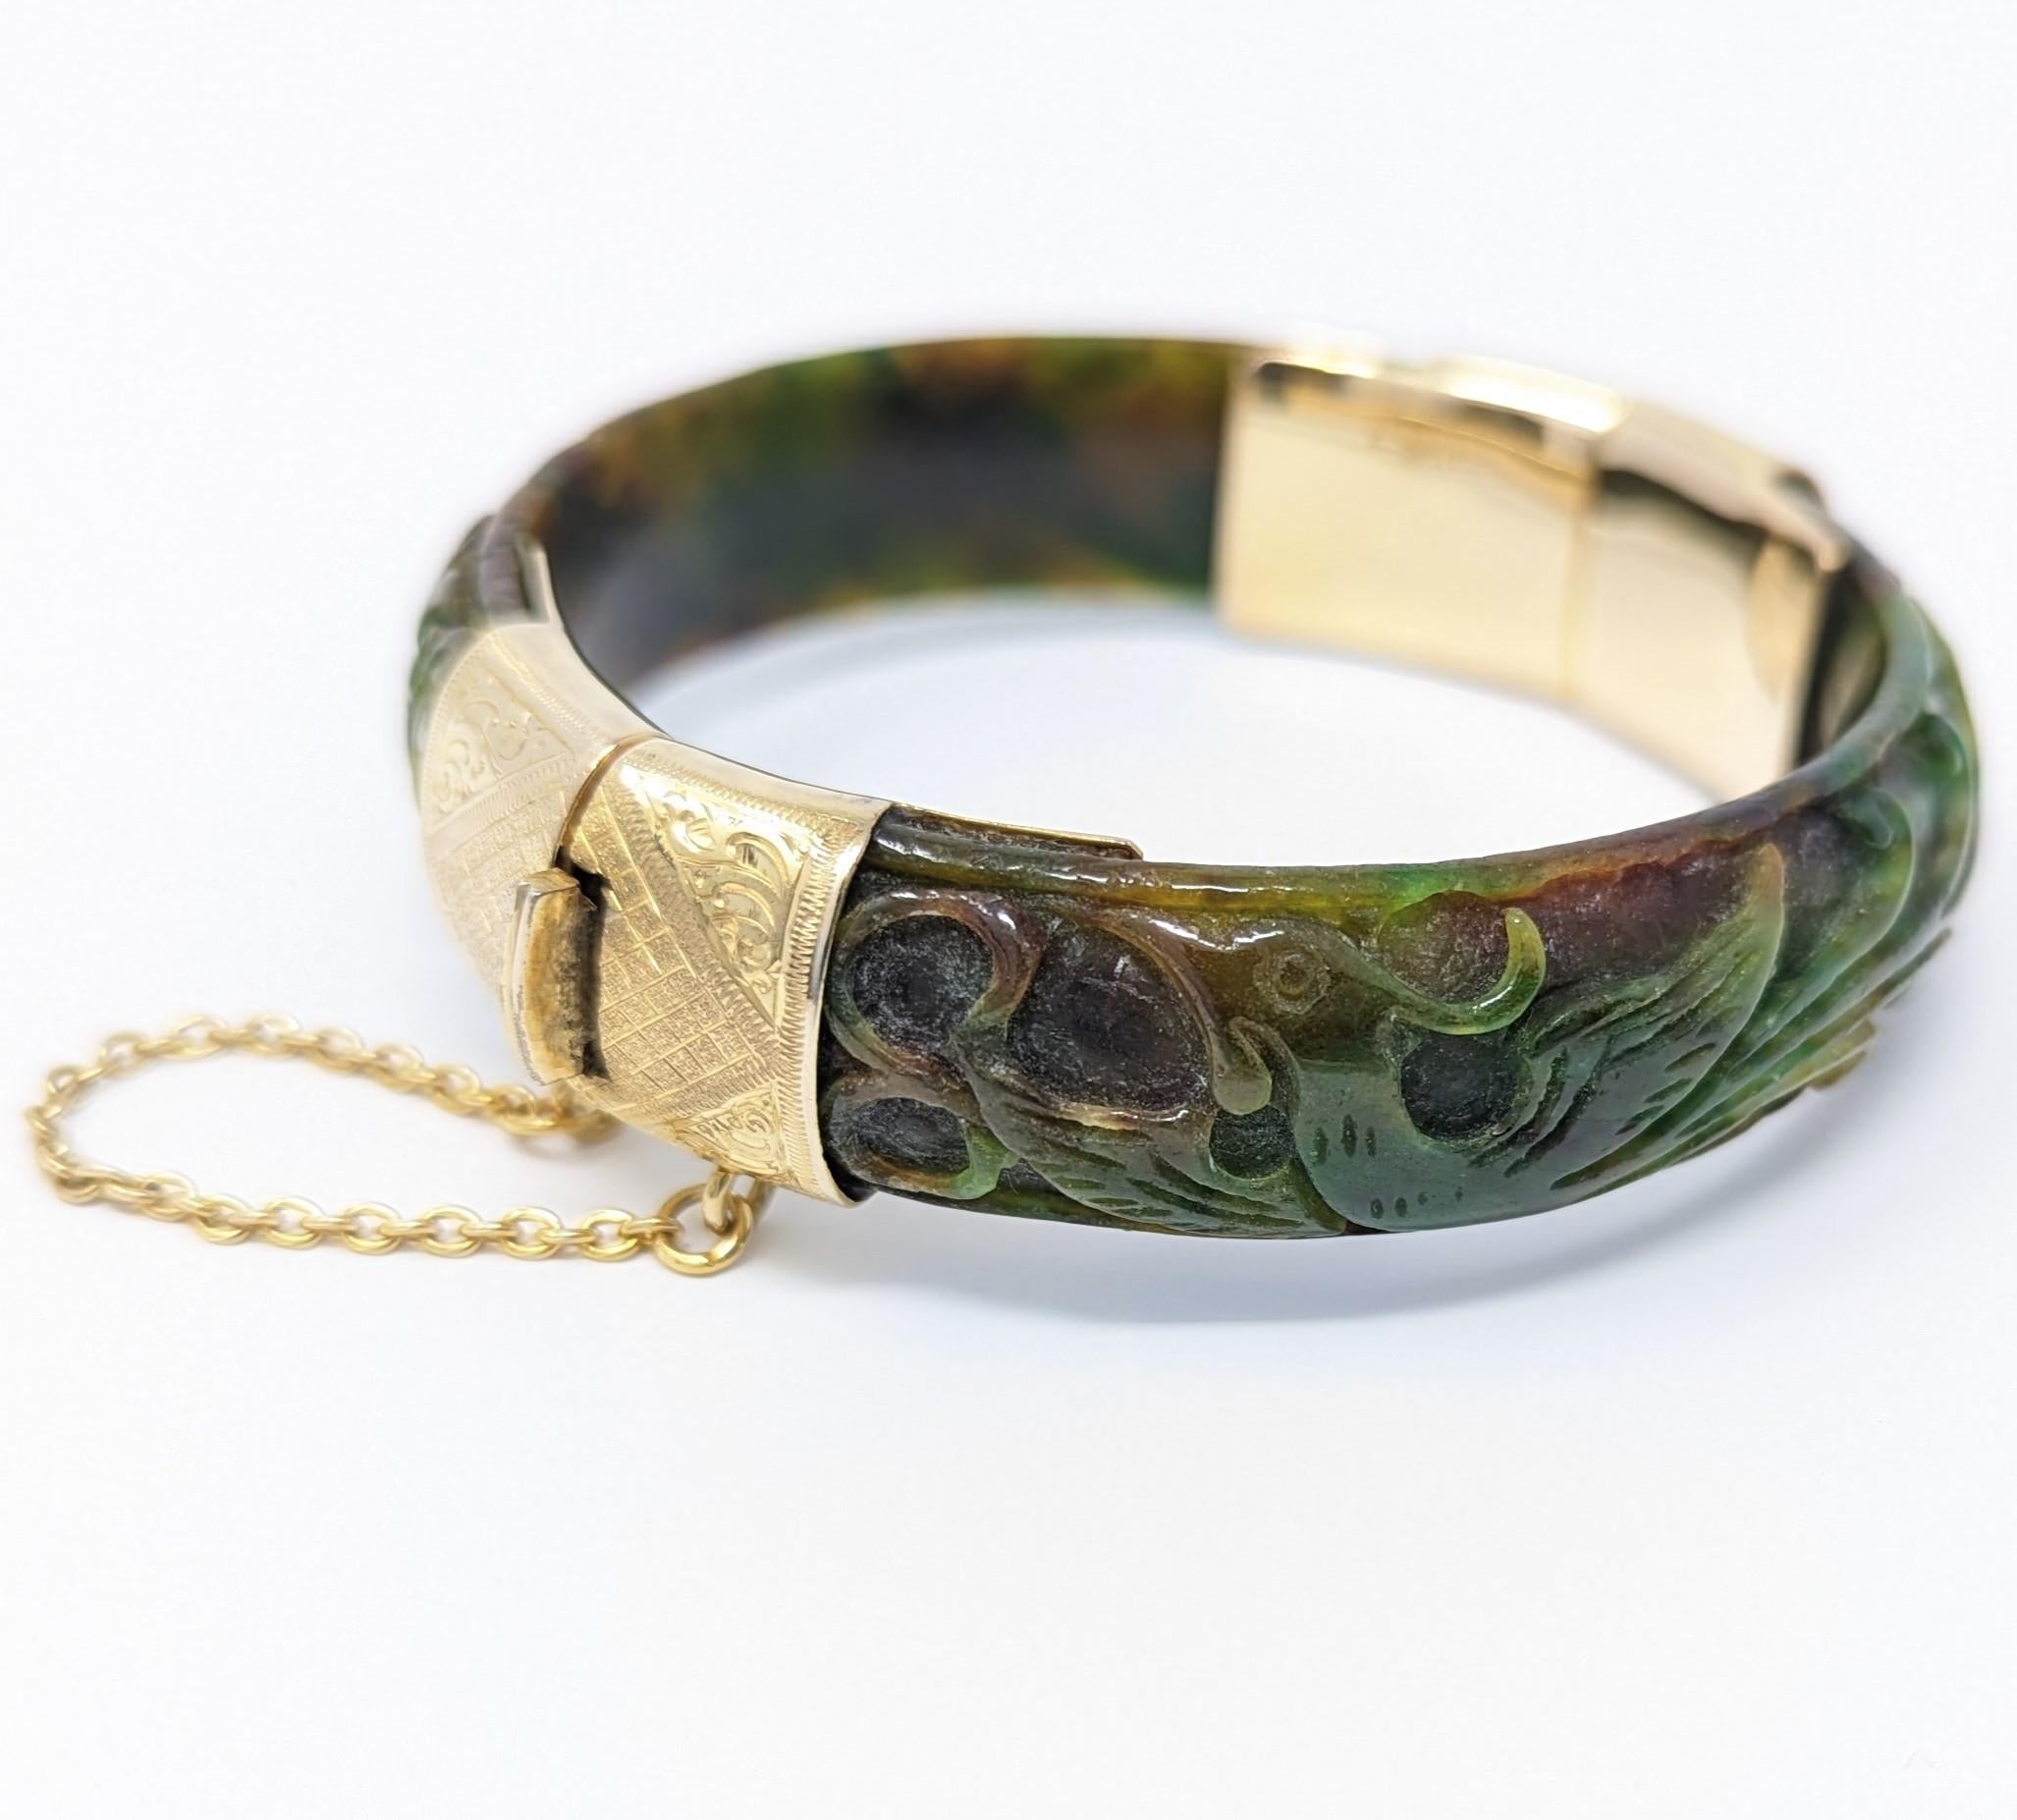 Mixed Cut Antique Carved Nephrite Jade 14k Bangle Bracelet 585 Solid Yellow Gold Asian For Sale